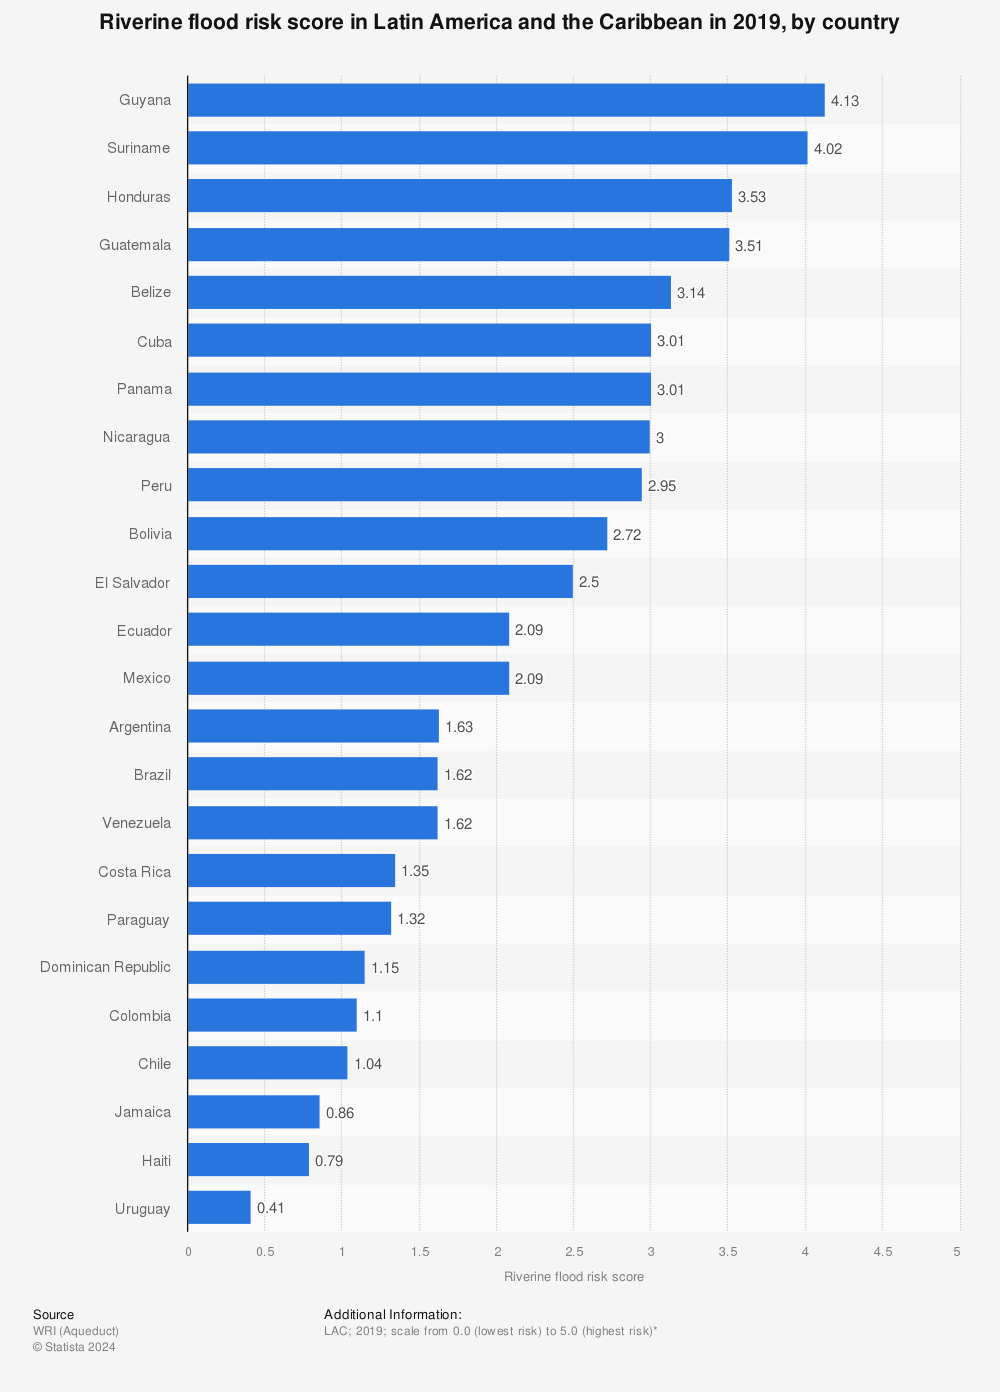 Statistic: Riverine flood risk score in Latin America and the Caribbean in 2019, by country | Statista